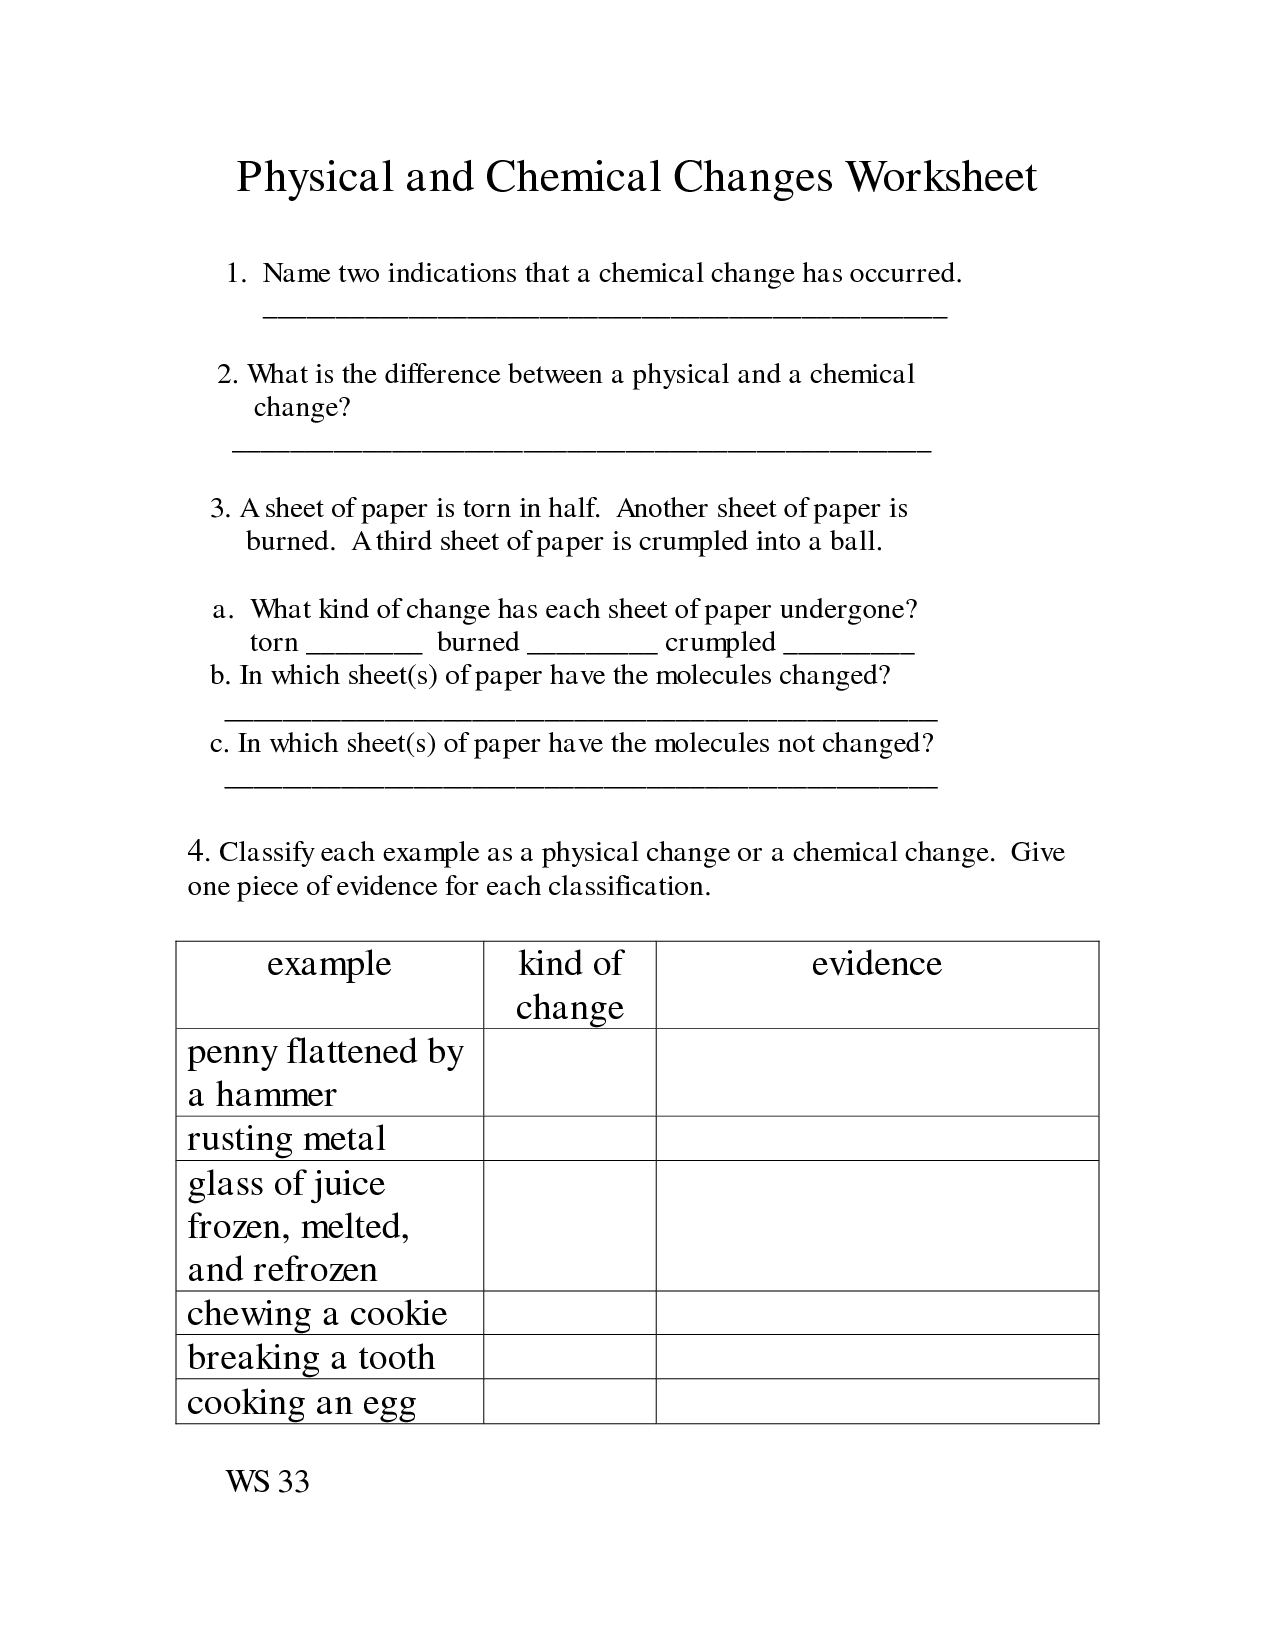 14 Best Images of Elementary Chemical Change Worksheets - State of ...